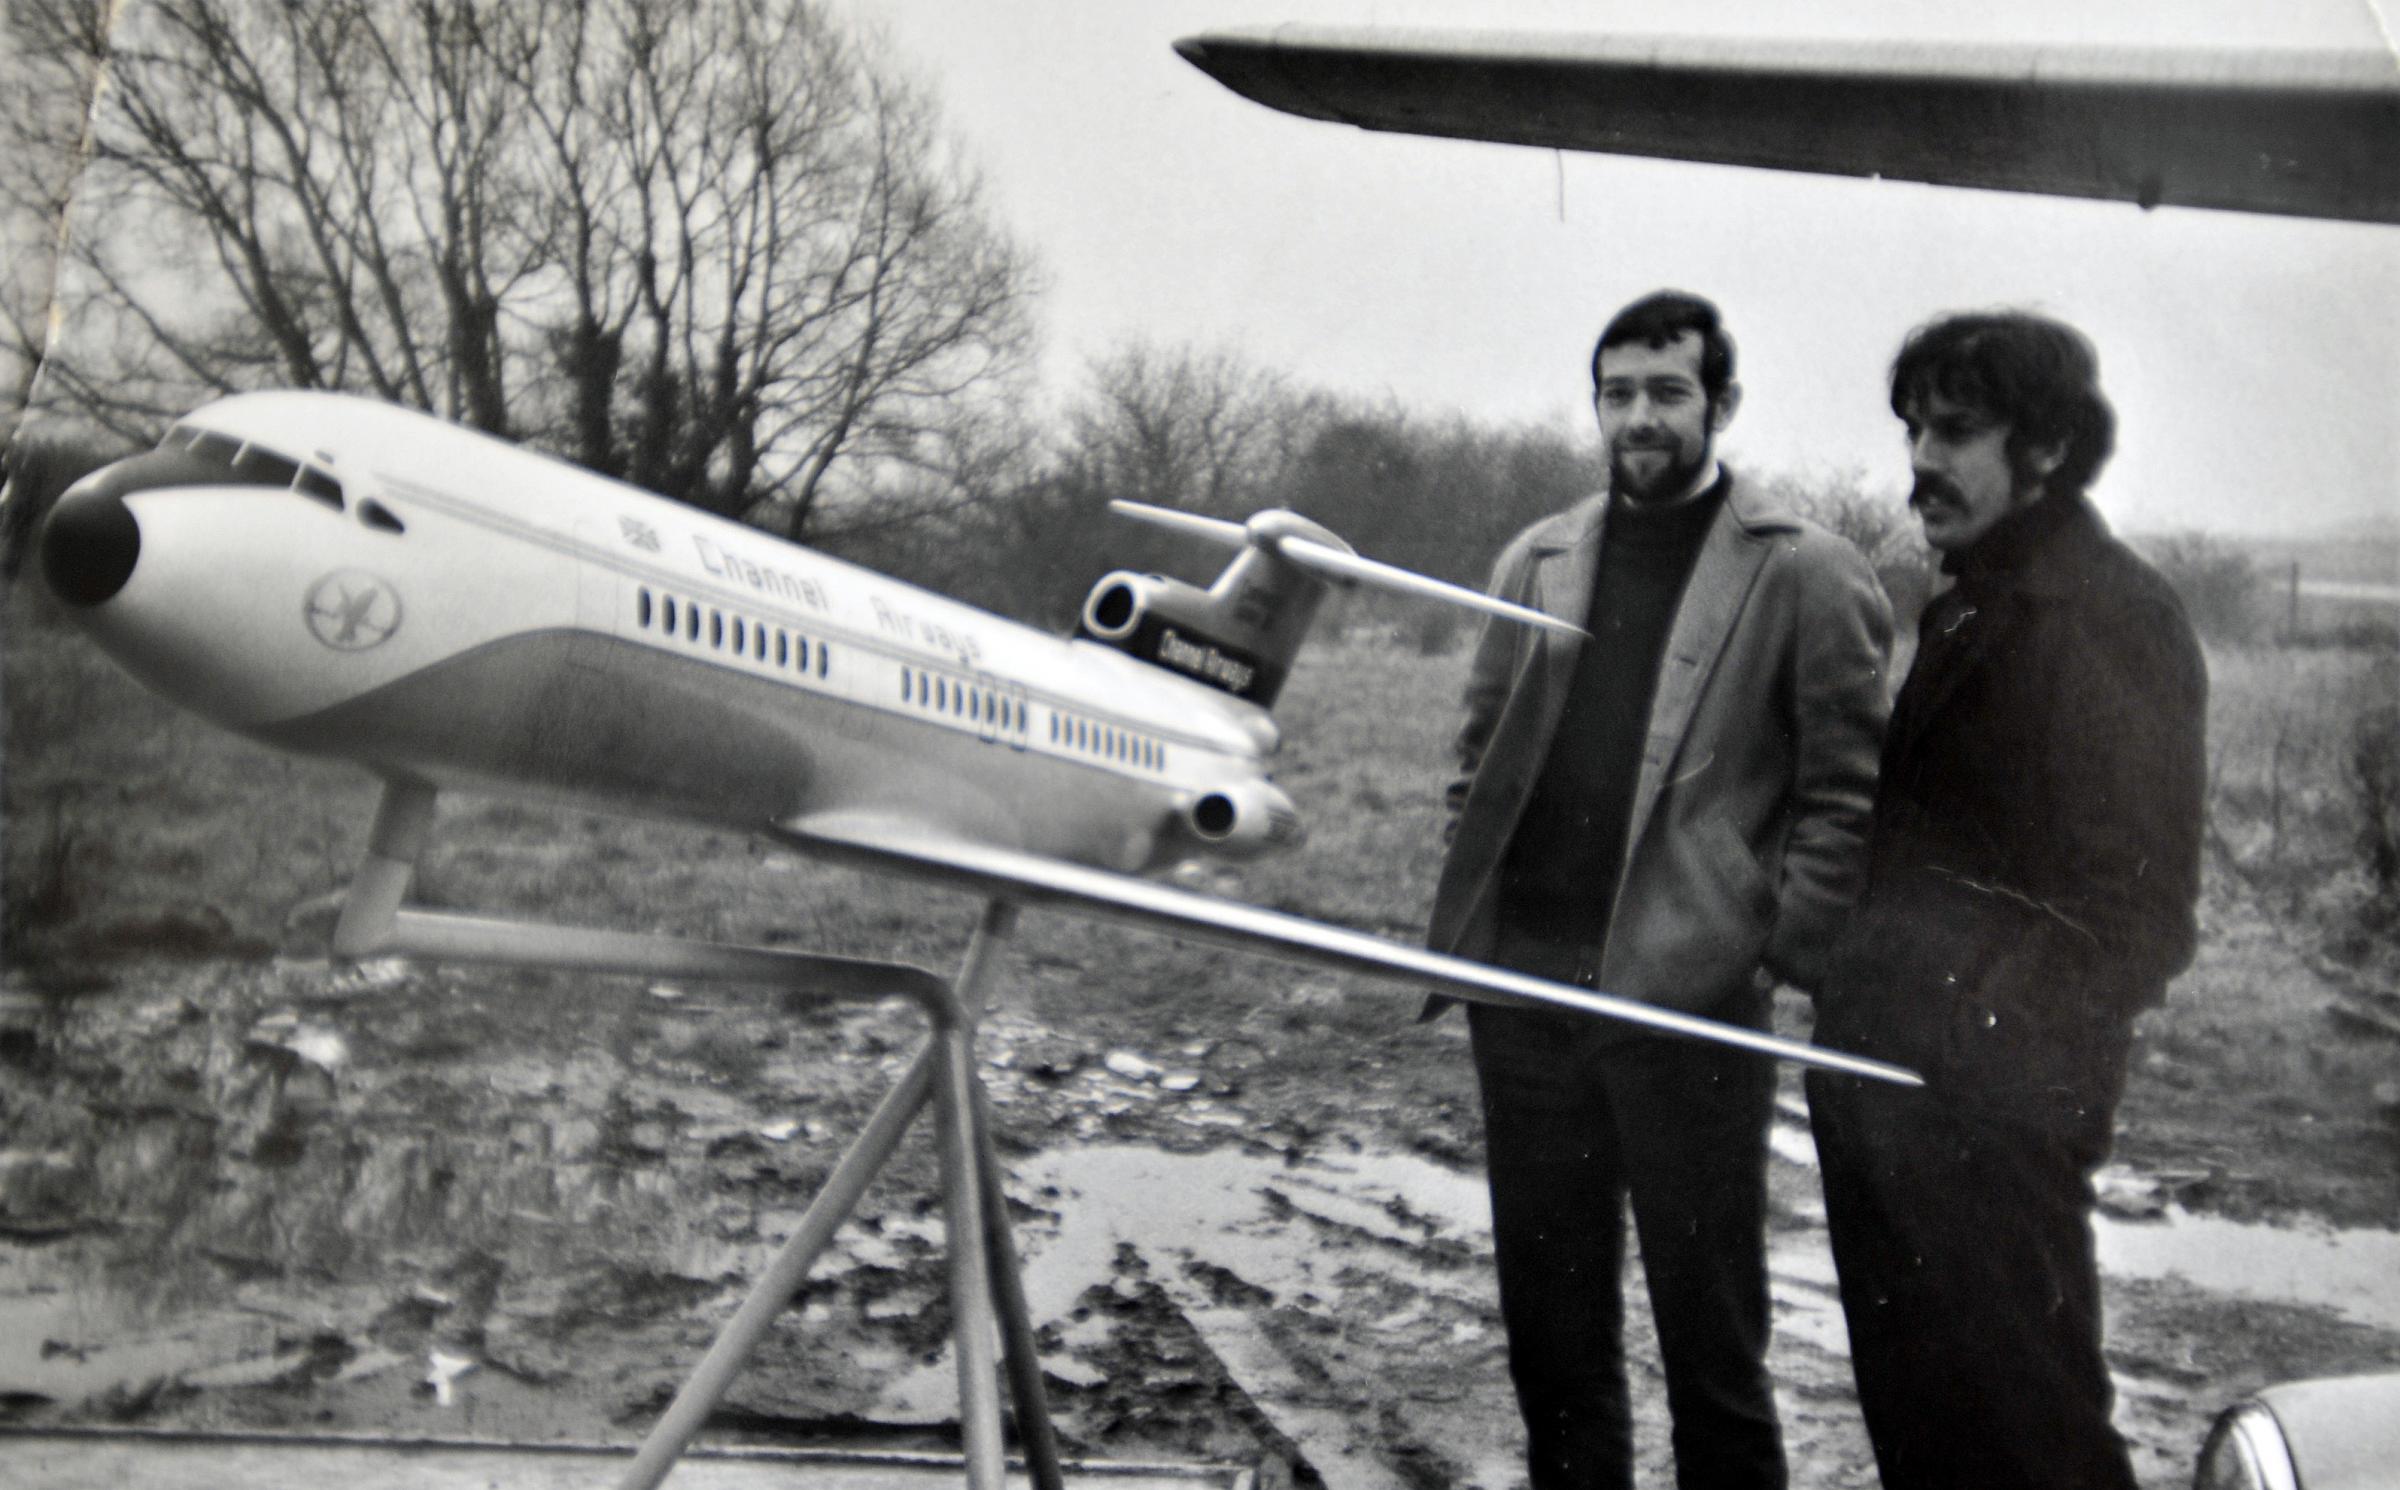 Looking back - Terry Carter, pictured on the left in the 1970s, used to paint Channel Airways planes at Southend Airport